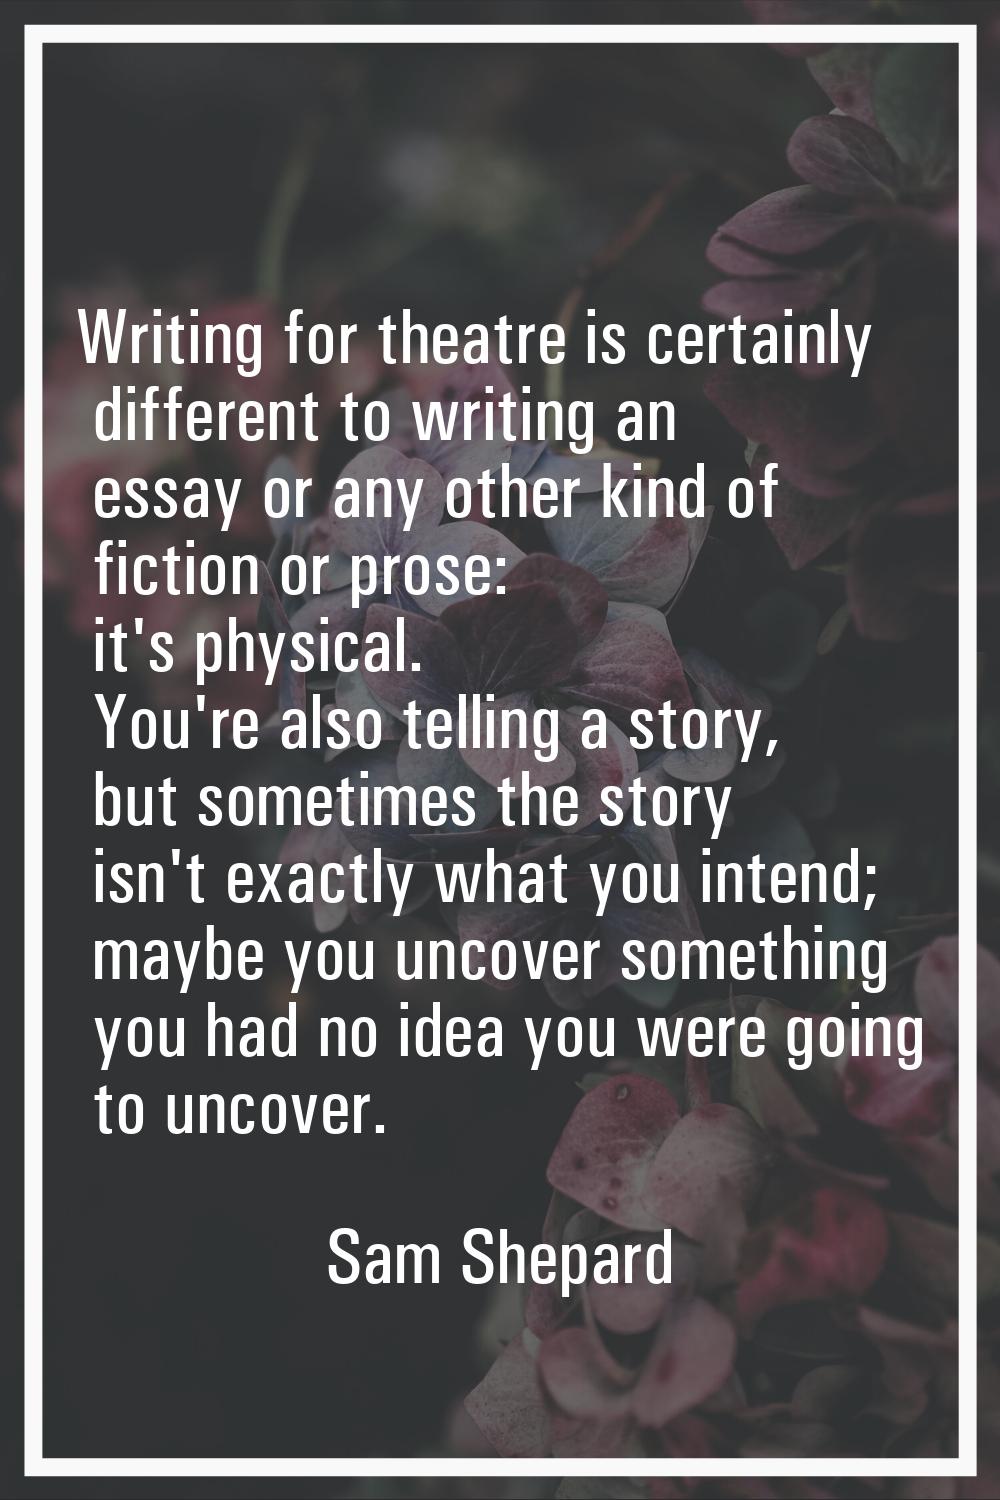 Writing for theatre is certainly different to writing an essay or any other kind of fiction or pros